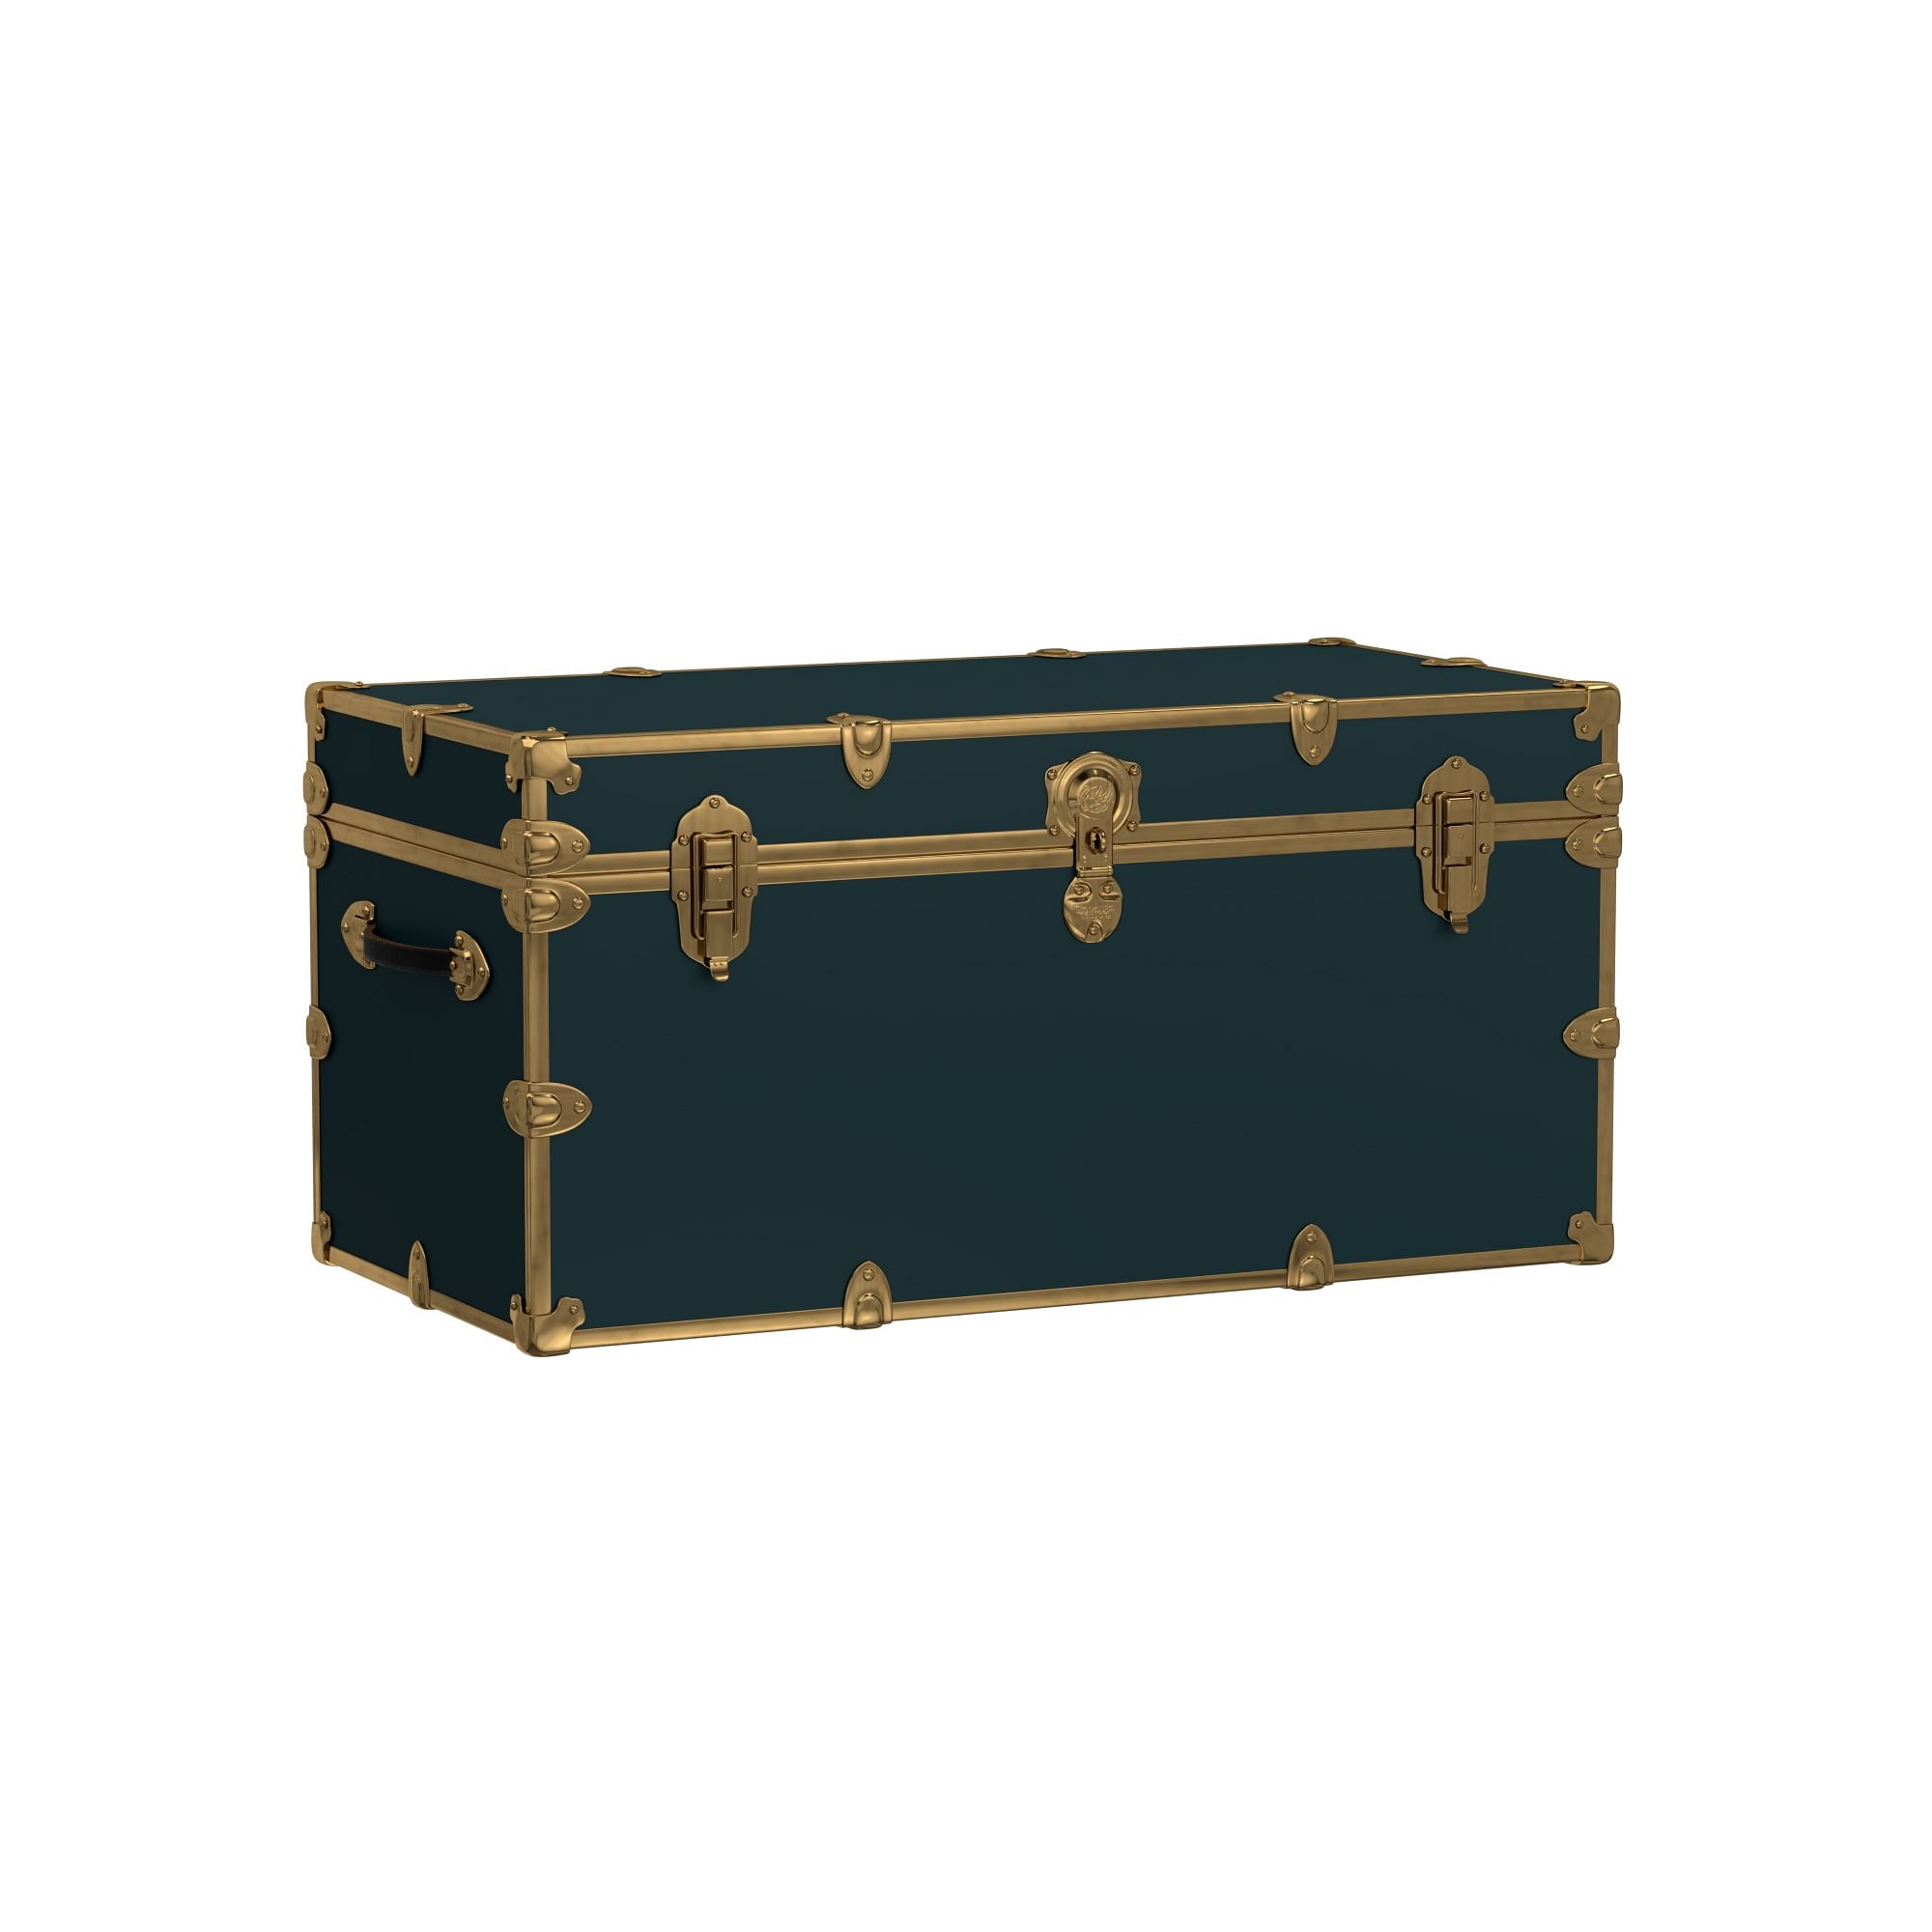 XXL Vinyl Dorm Trunk, Forest Green with Rubbed Brass - Image 0